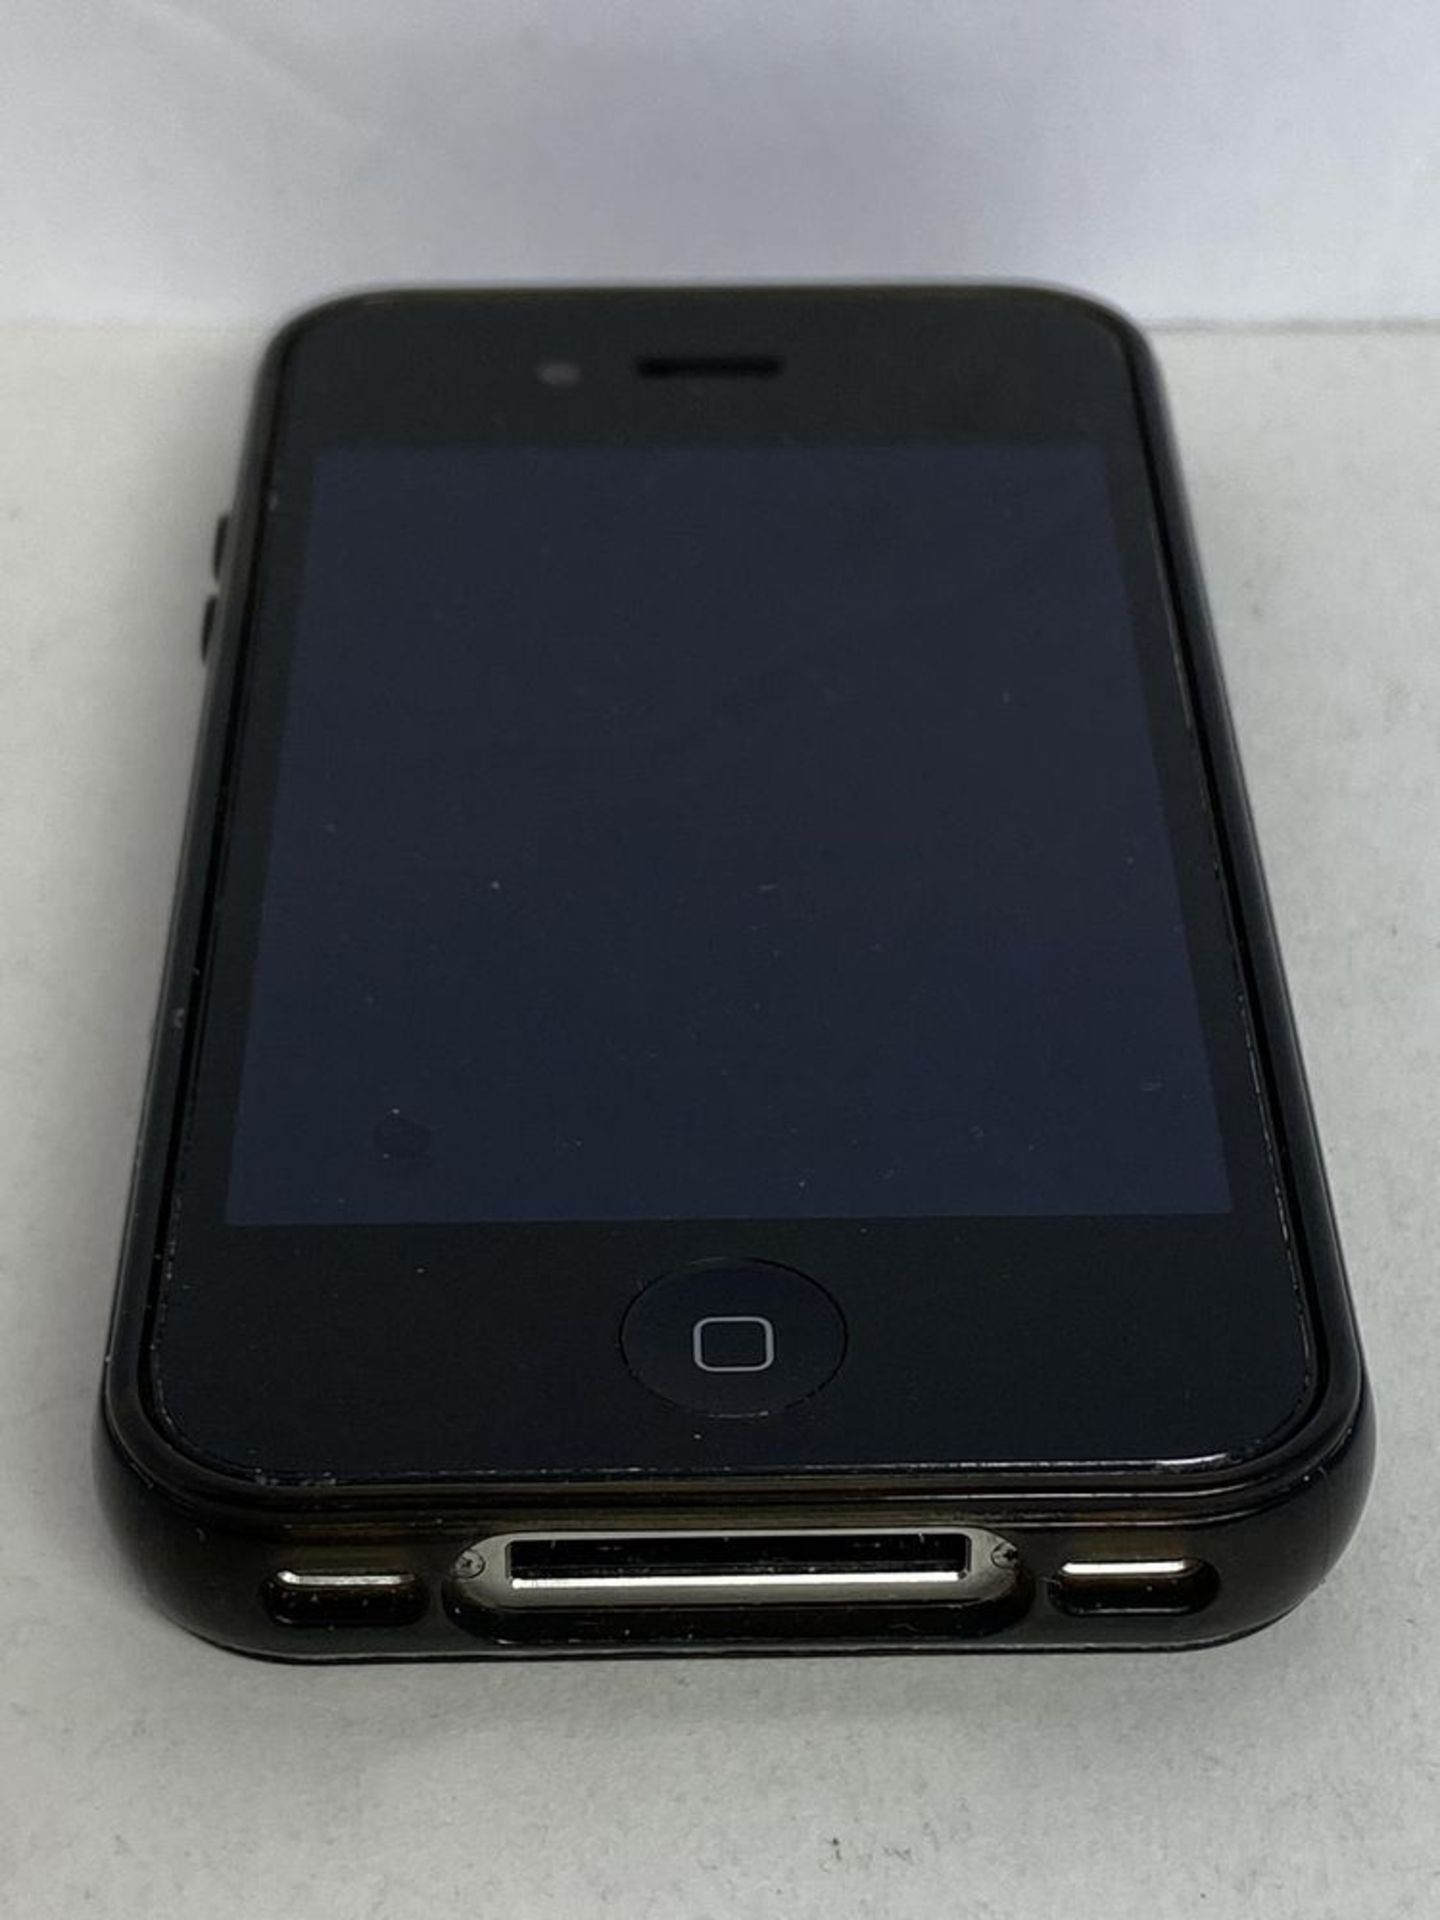 Apple iPhone 4S Model A1387, Black, In Case - Image 3 of 3